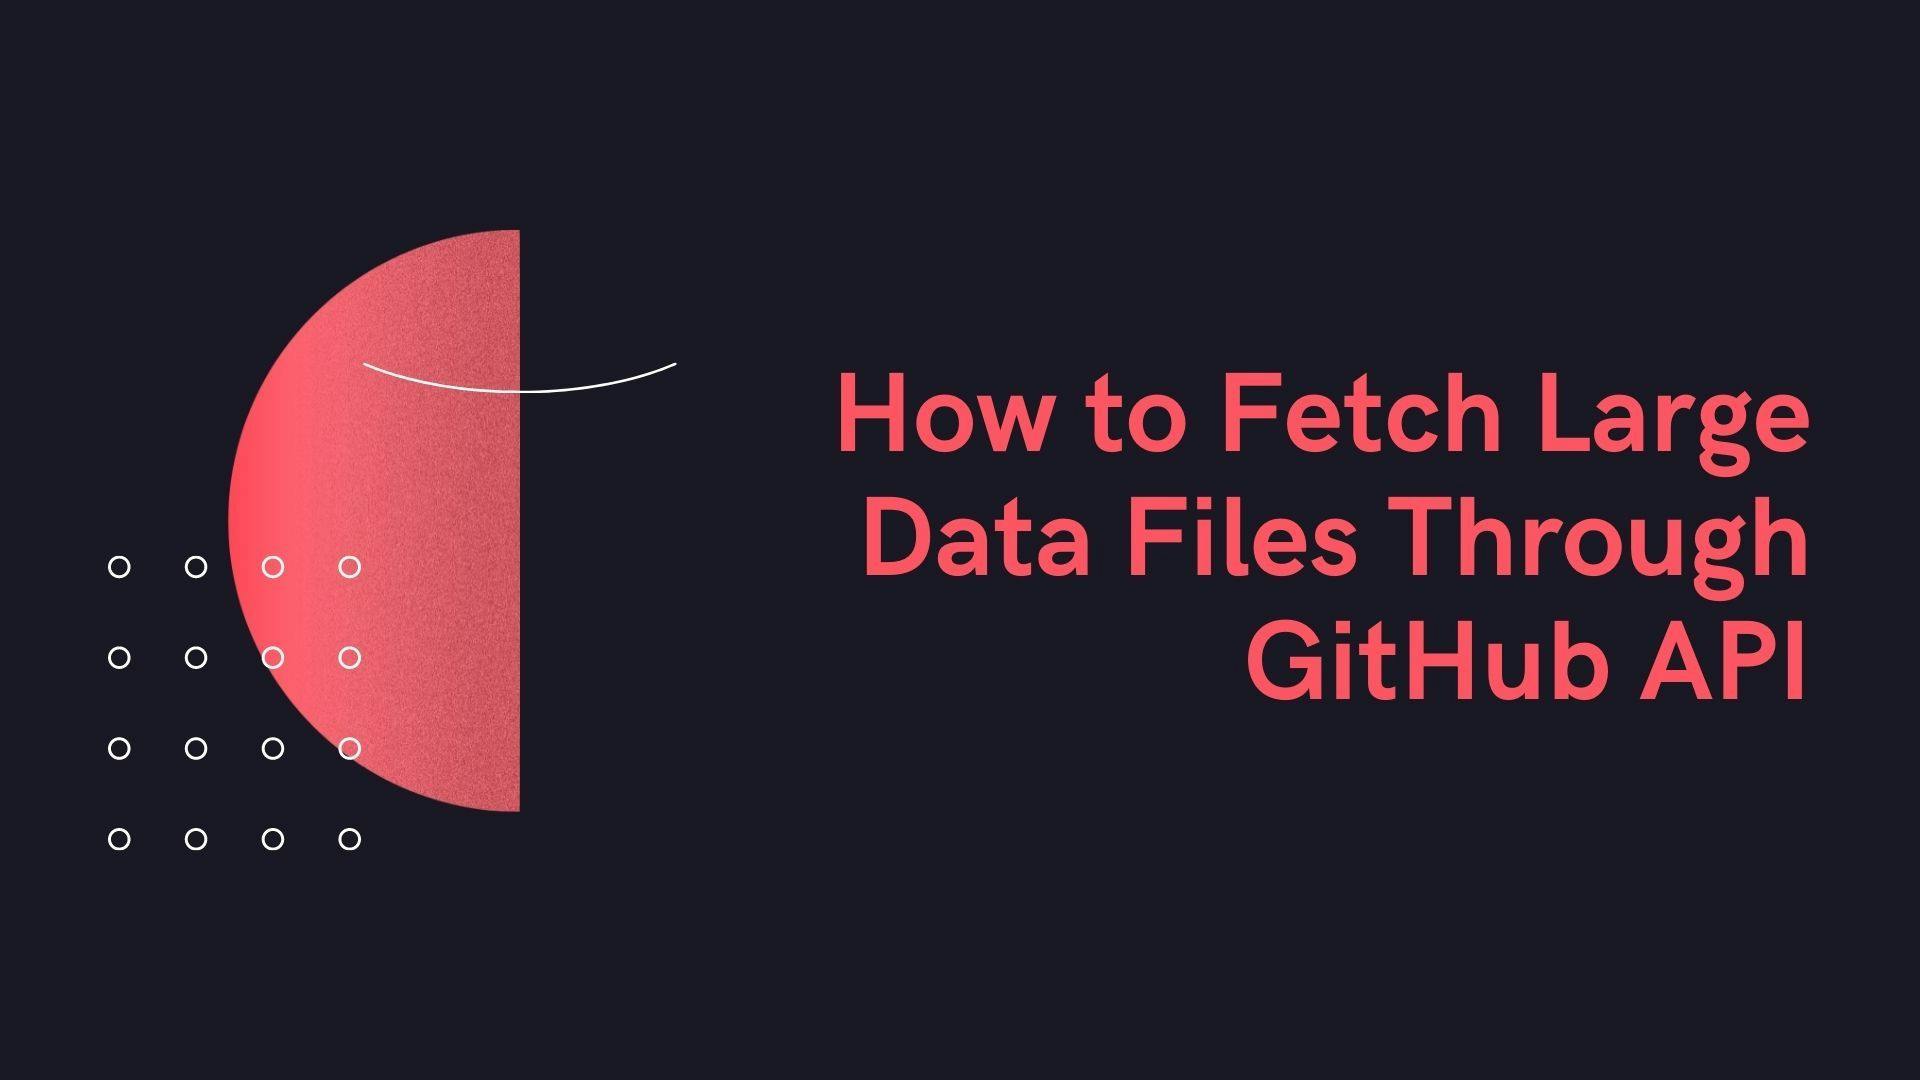 featured image - How to Fetch Large Data Files Through GitHub API